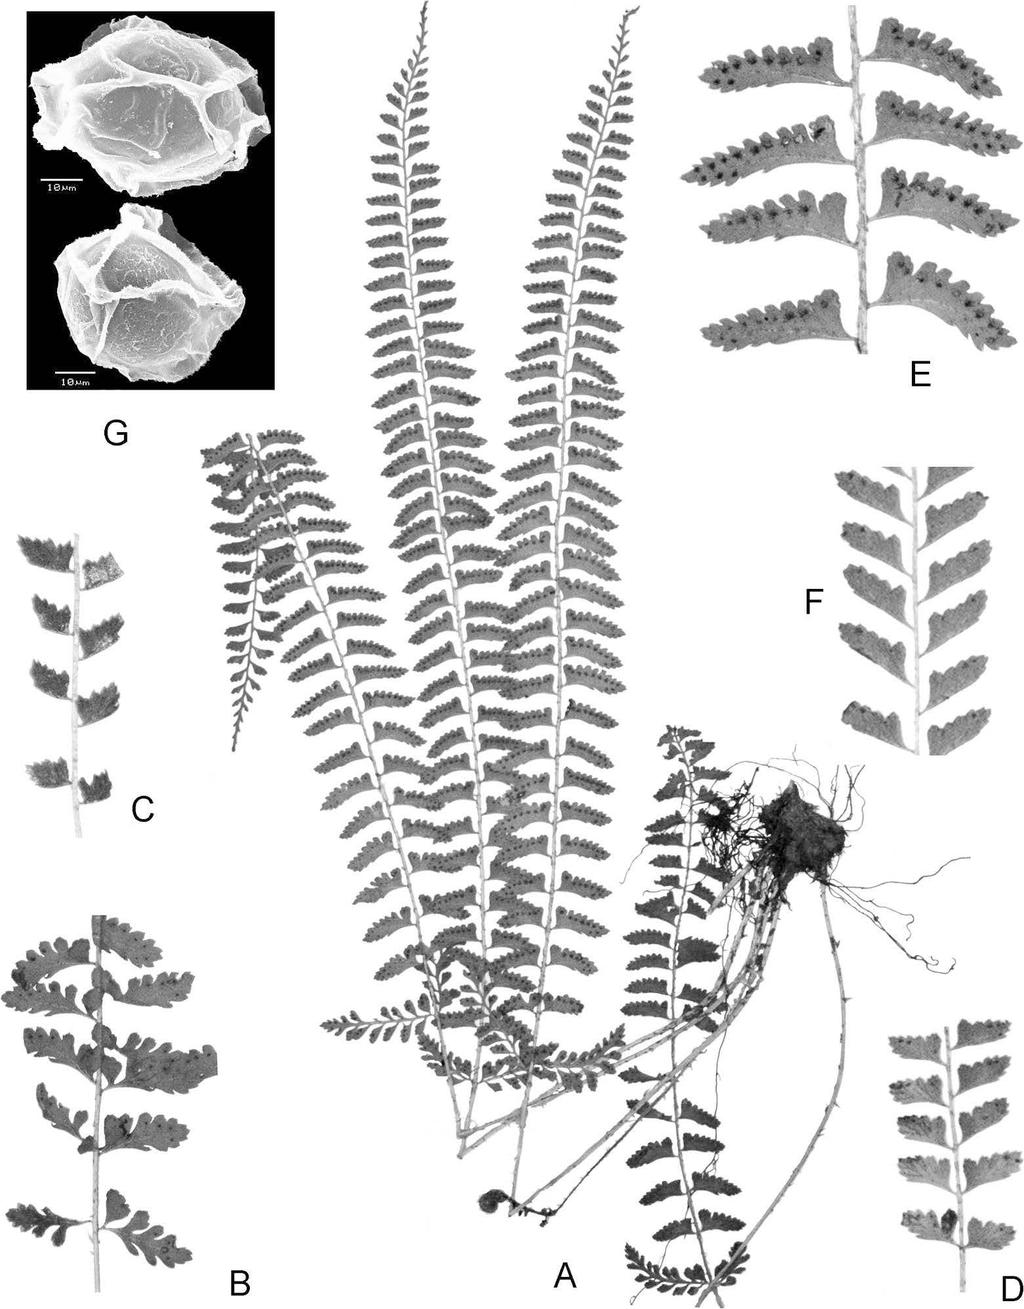 Volume 22, Number 2 Zhang & Wang 253 2012 Polystichum normale (Dryopteridaceae) from Guizhou, China Figure 2. Polystichum normale Ching ex P. S. Wang & Li Bing Zhang. A. Habit.